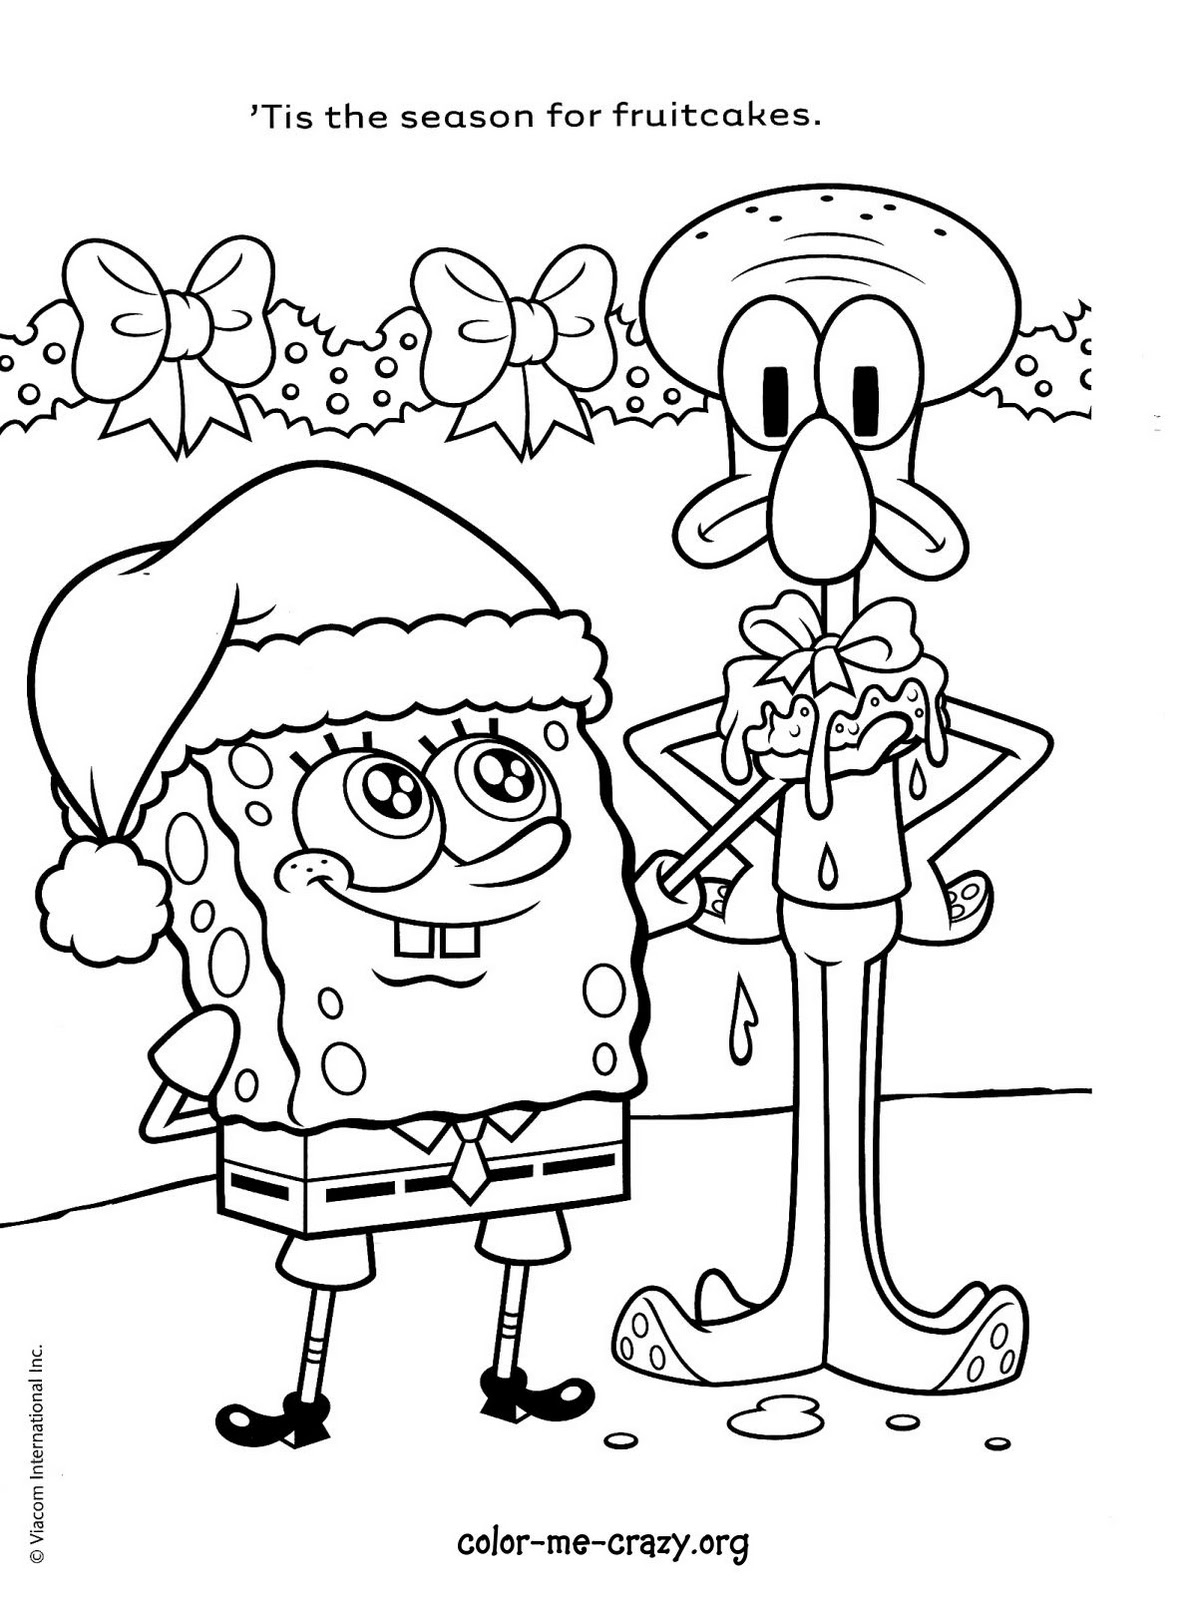 Download ColorMeCrazy.org: Holiday Coloring Pages